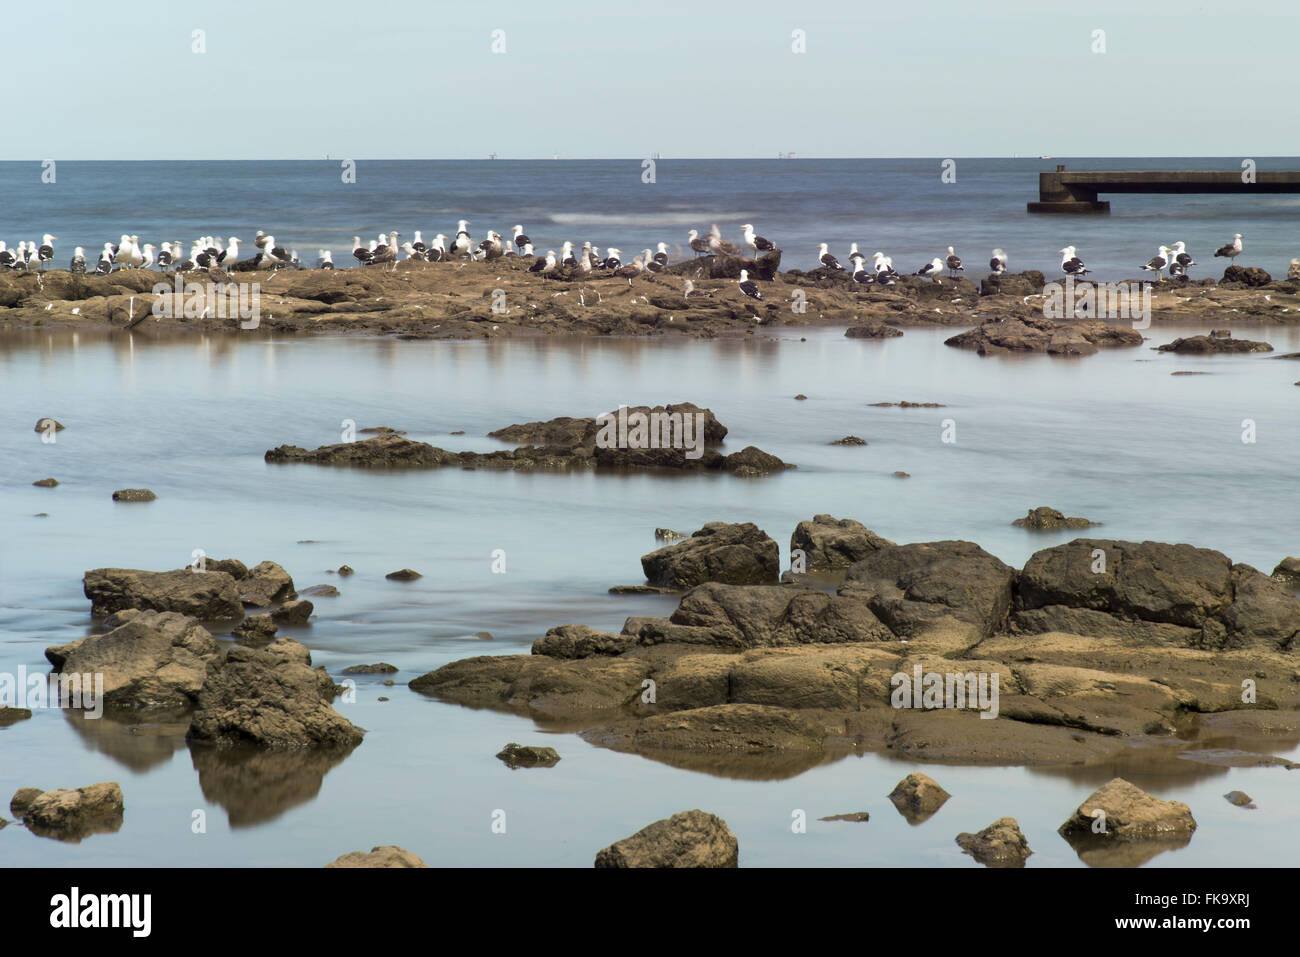 Seagulls on the River Plate margin Stock Photo